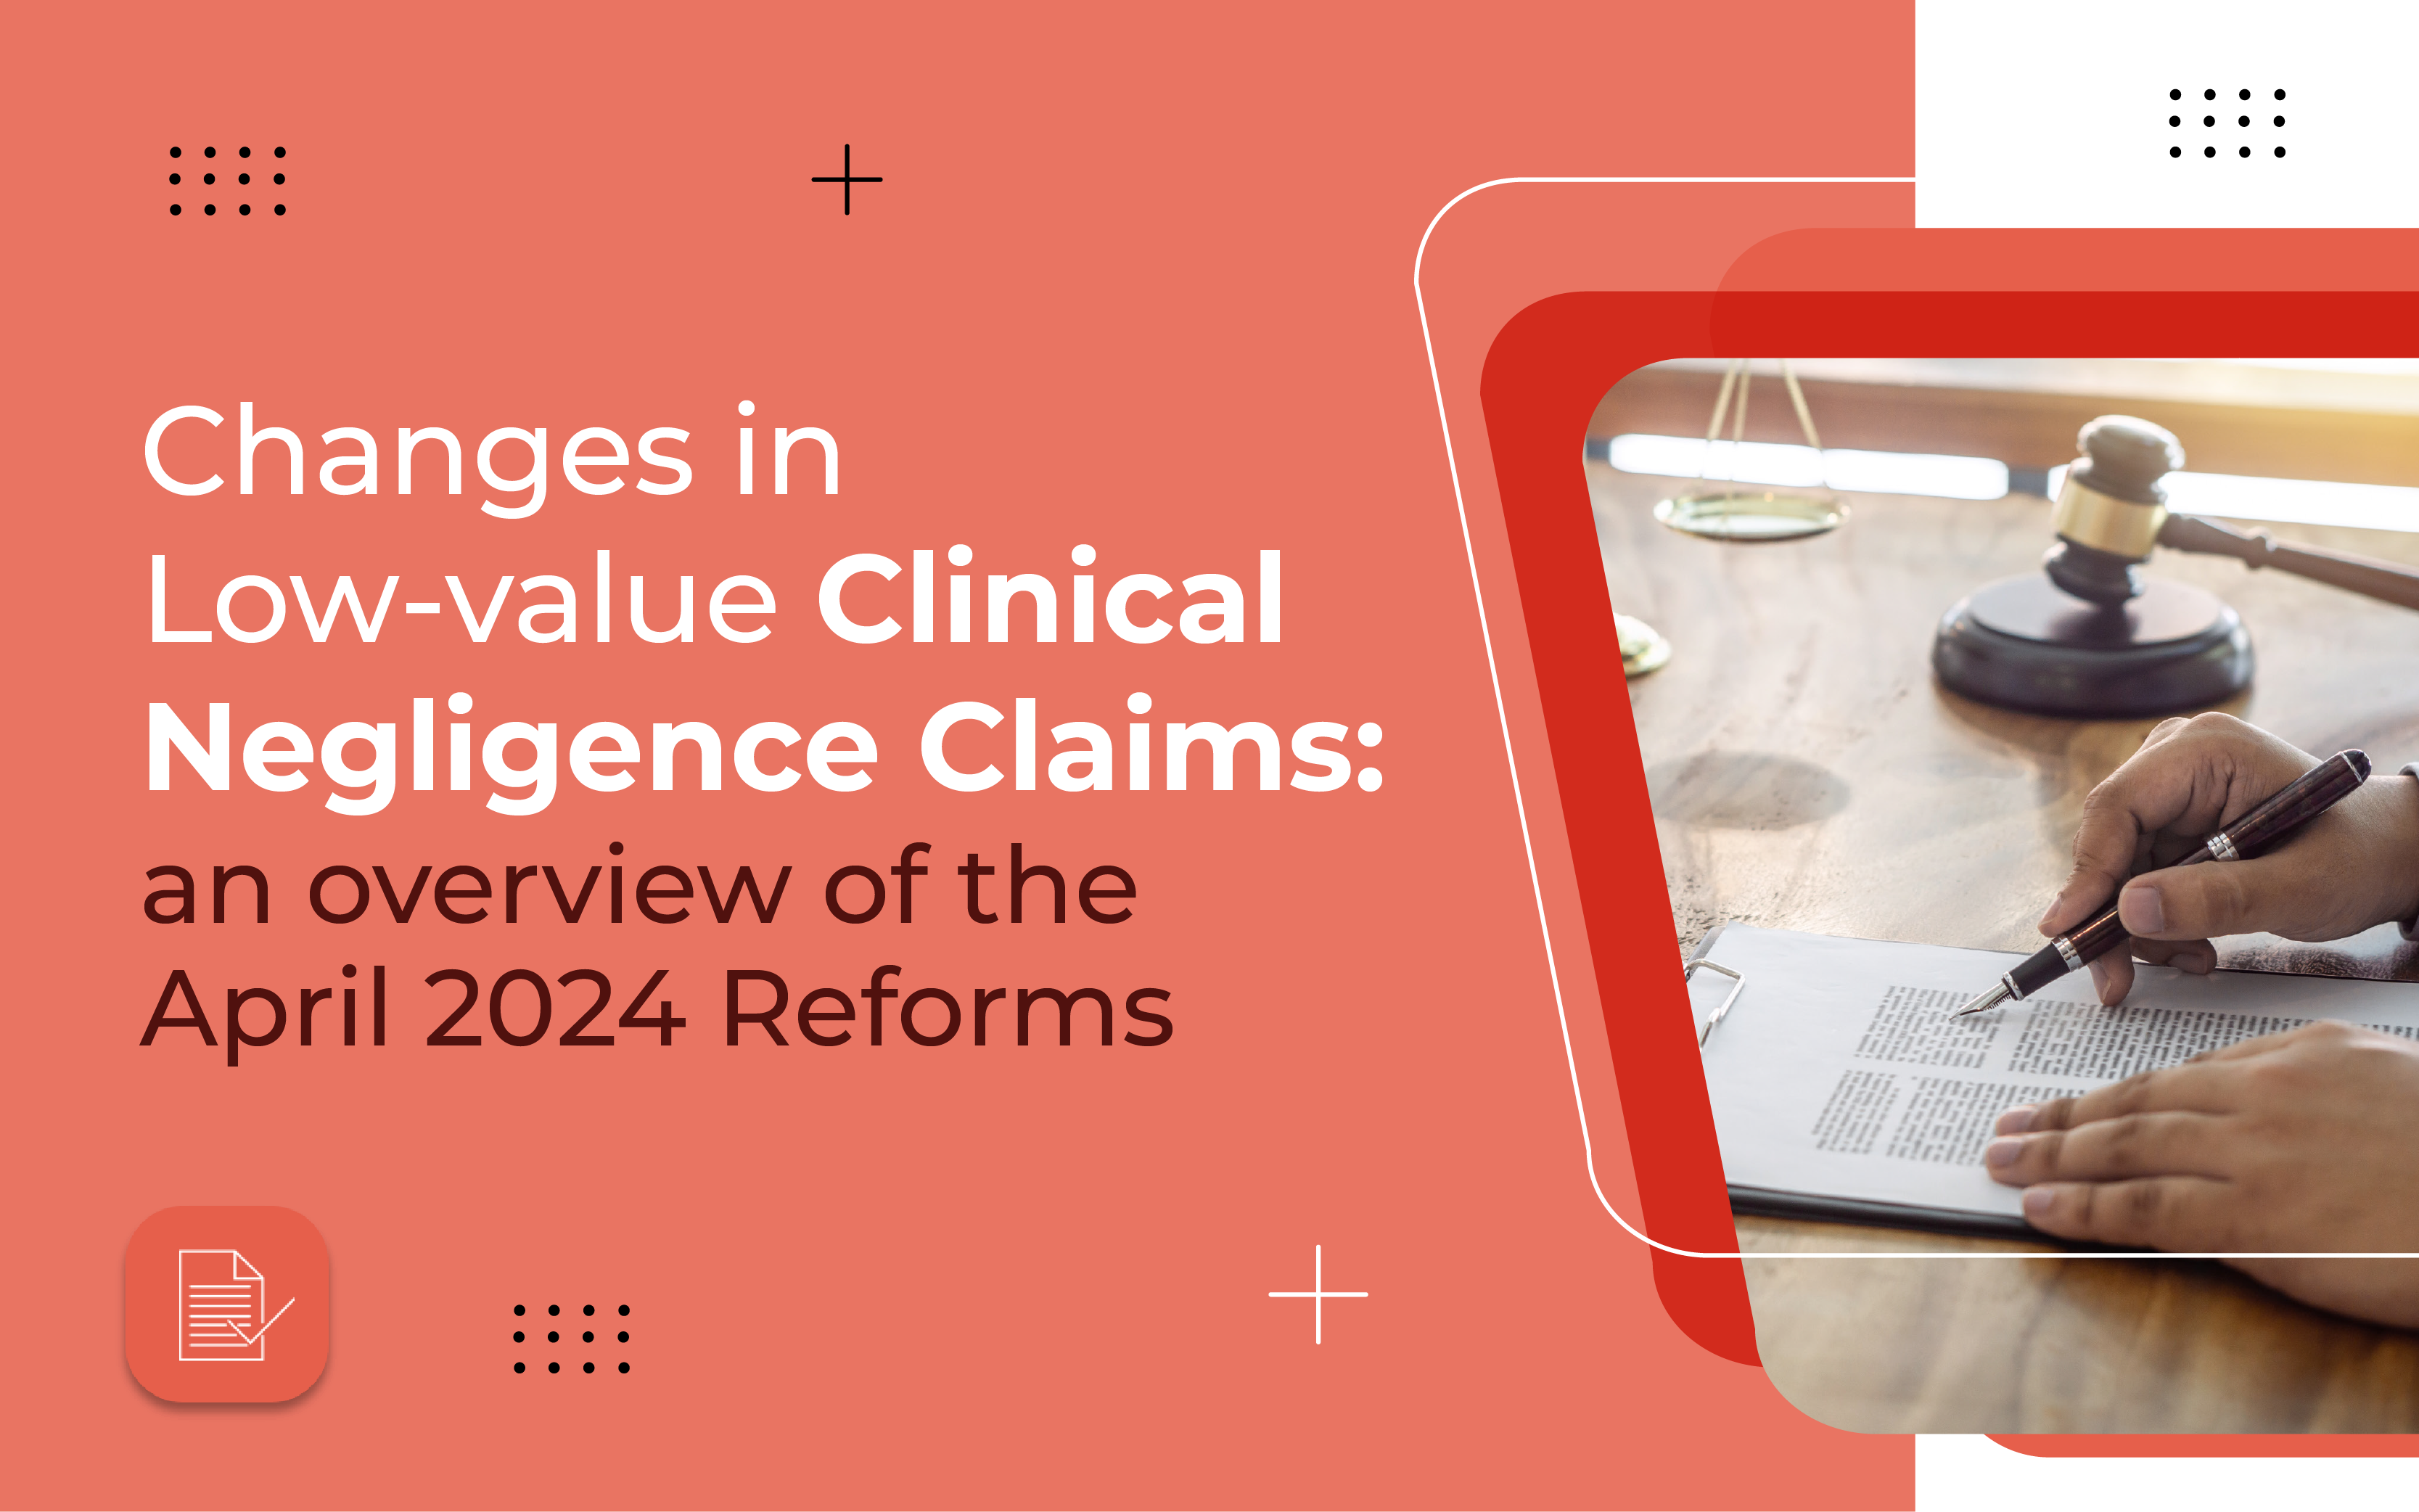 Changes in low-value clinical negligence claims: an overview of the April 2024 Reforms